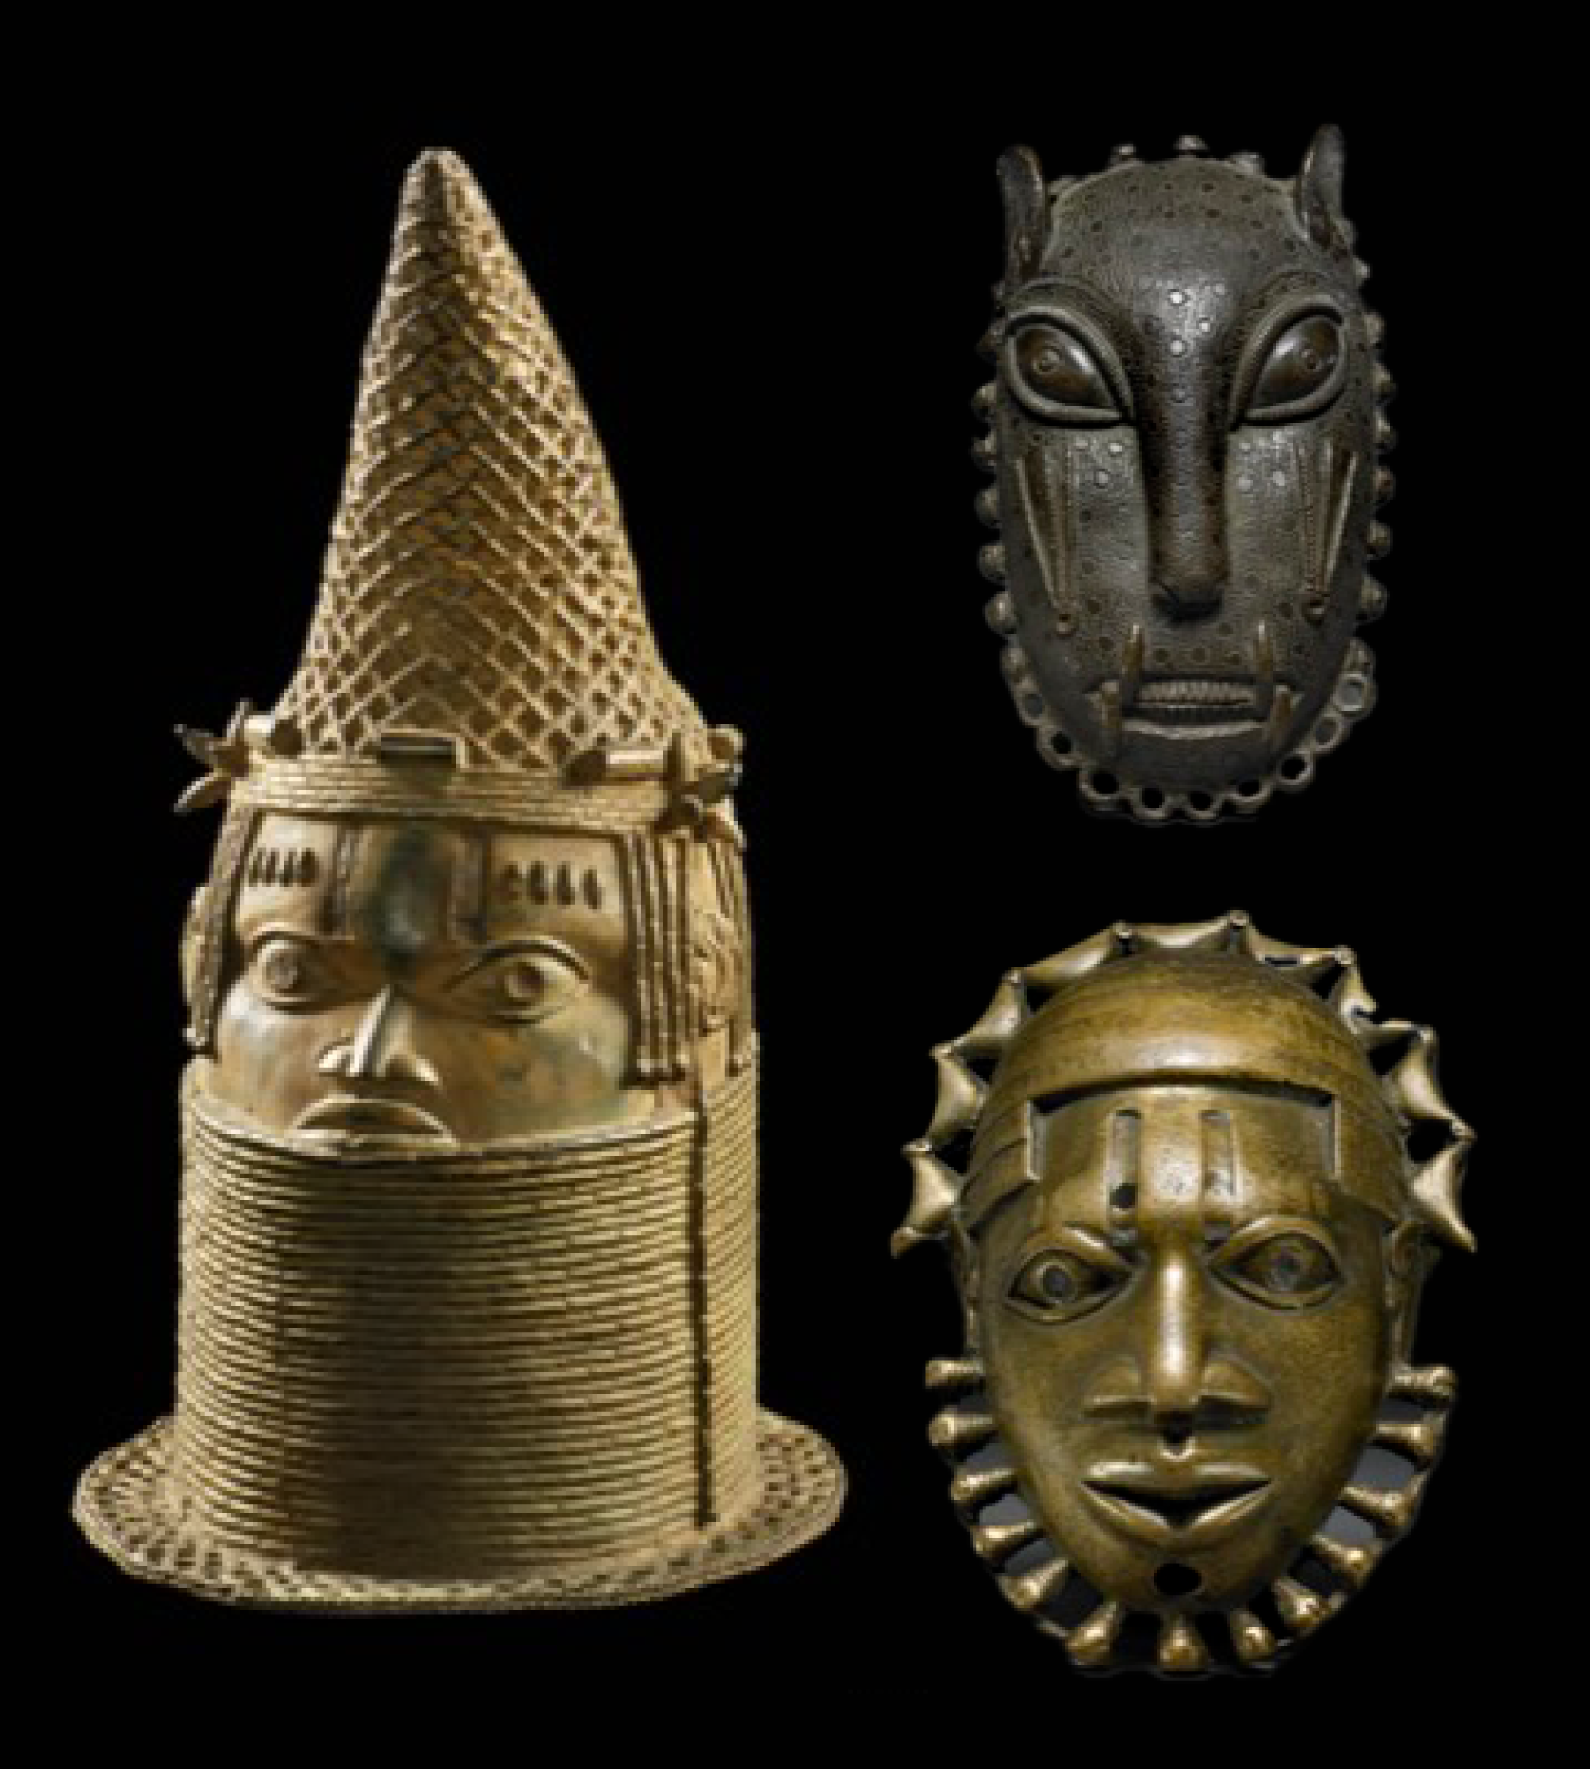 Some photographs of some of the Bronze heads stolen from the Edo Kingdom